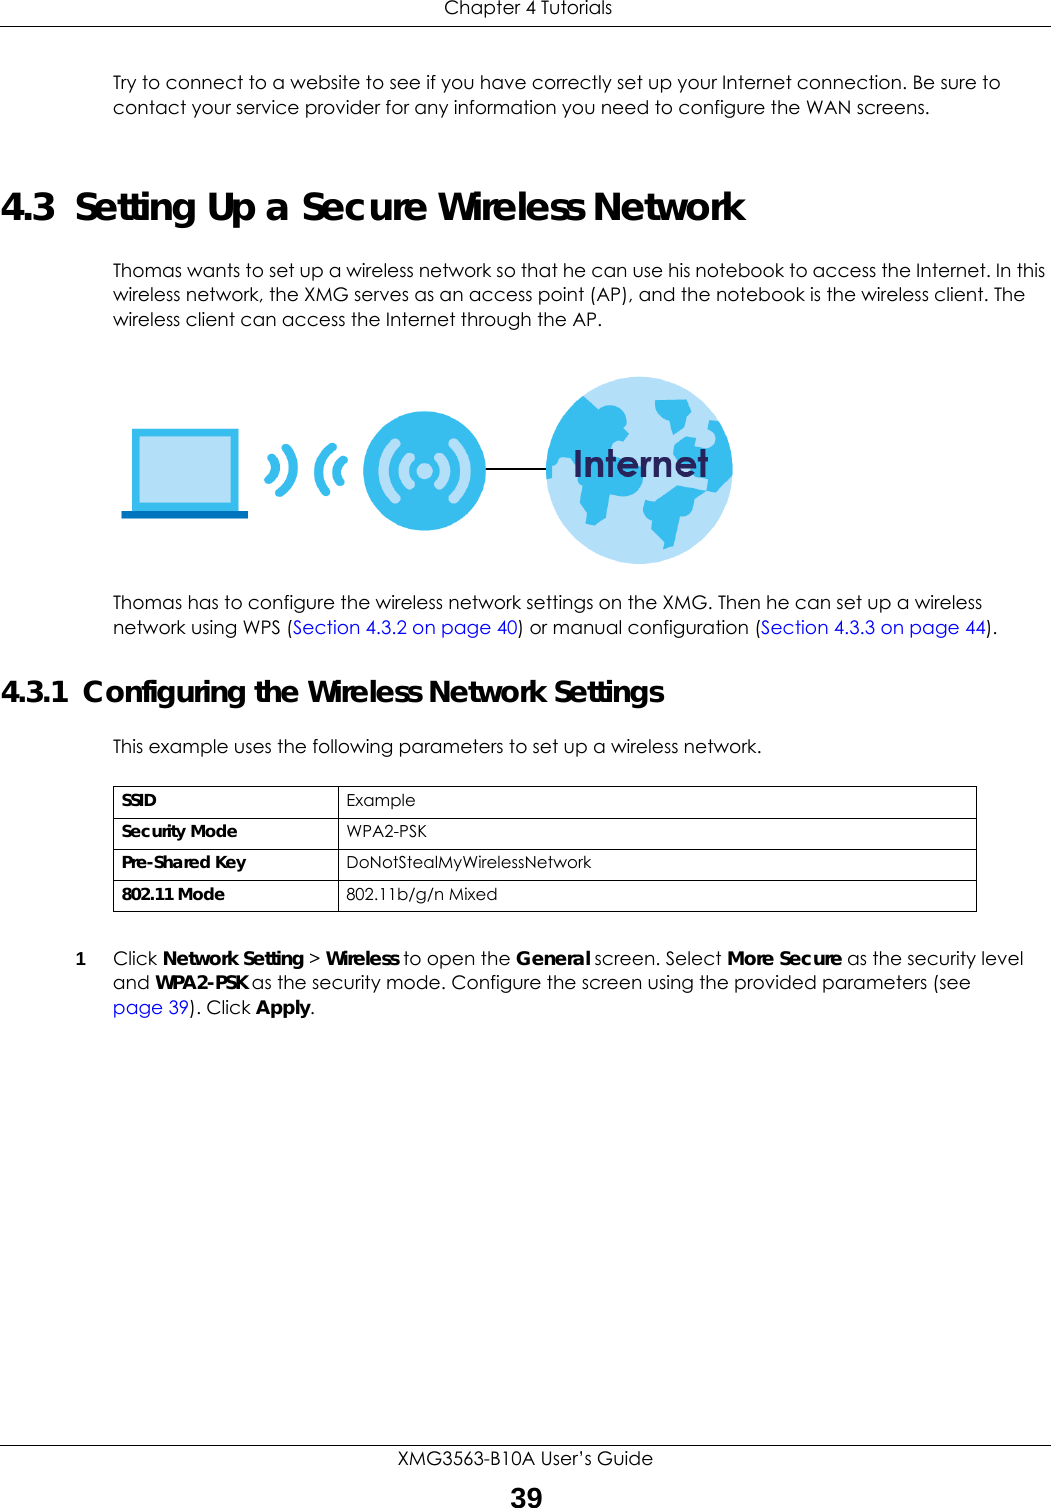  Chapter 4 TutorialsXMG3563-B10A User’s Guide39Try to connect to a website to see if you have correctly set up your Internet connection. Be sure to contact your service provider for any information you need to configure the WAN screens.4.3  Setting Up a Secure Wireless NetworkThomas wants to set up a wireless network so that he can use his notebook to access the Internet. In this wireless network, the XMG serves as an access point (AP), and the notebook is the wireless client. The wireless client can access the Internet through the AP.Thomas has to configure the wireless network settings on the XMG. Then he can set up a wireless network using WPS (Section 4.3.2 on page 40) or manual configuration (Section 4.3.3 on page 44).4.3.1  Configuring the Wireless Network SettingsThis example uses the following parameters to set up a wireless network.1Click Network Setting &gt; Wireless to open the General screen. Select More Secure as the security level and WPA2-PSK as the security mode. Configure the screen using the provided parameters (see page 39). Click Apply.SSID ExampleSecurity Mode WPA2-PSKPre-Shared Key DoNotStealMyWirelessNetwork802.11 Mode 802.11b/g/n Mixed